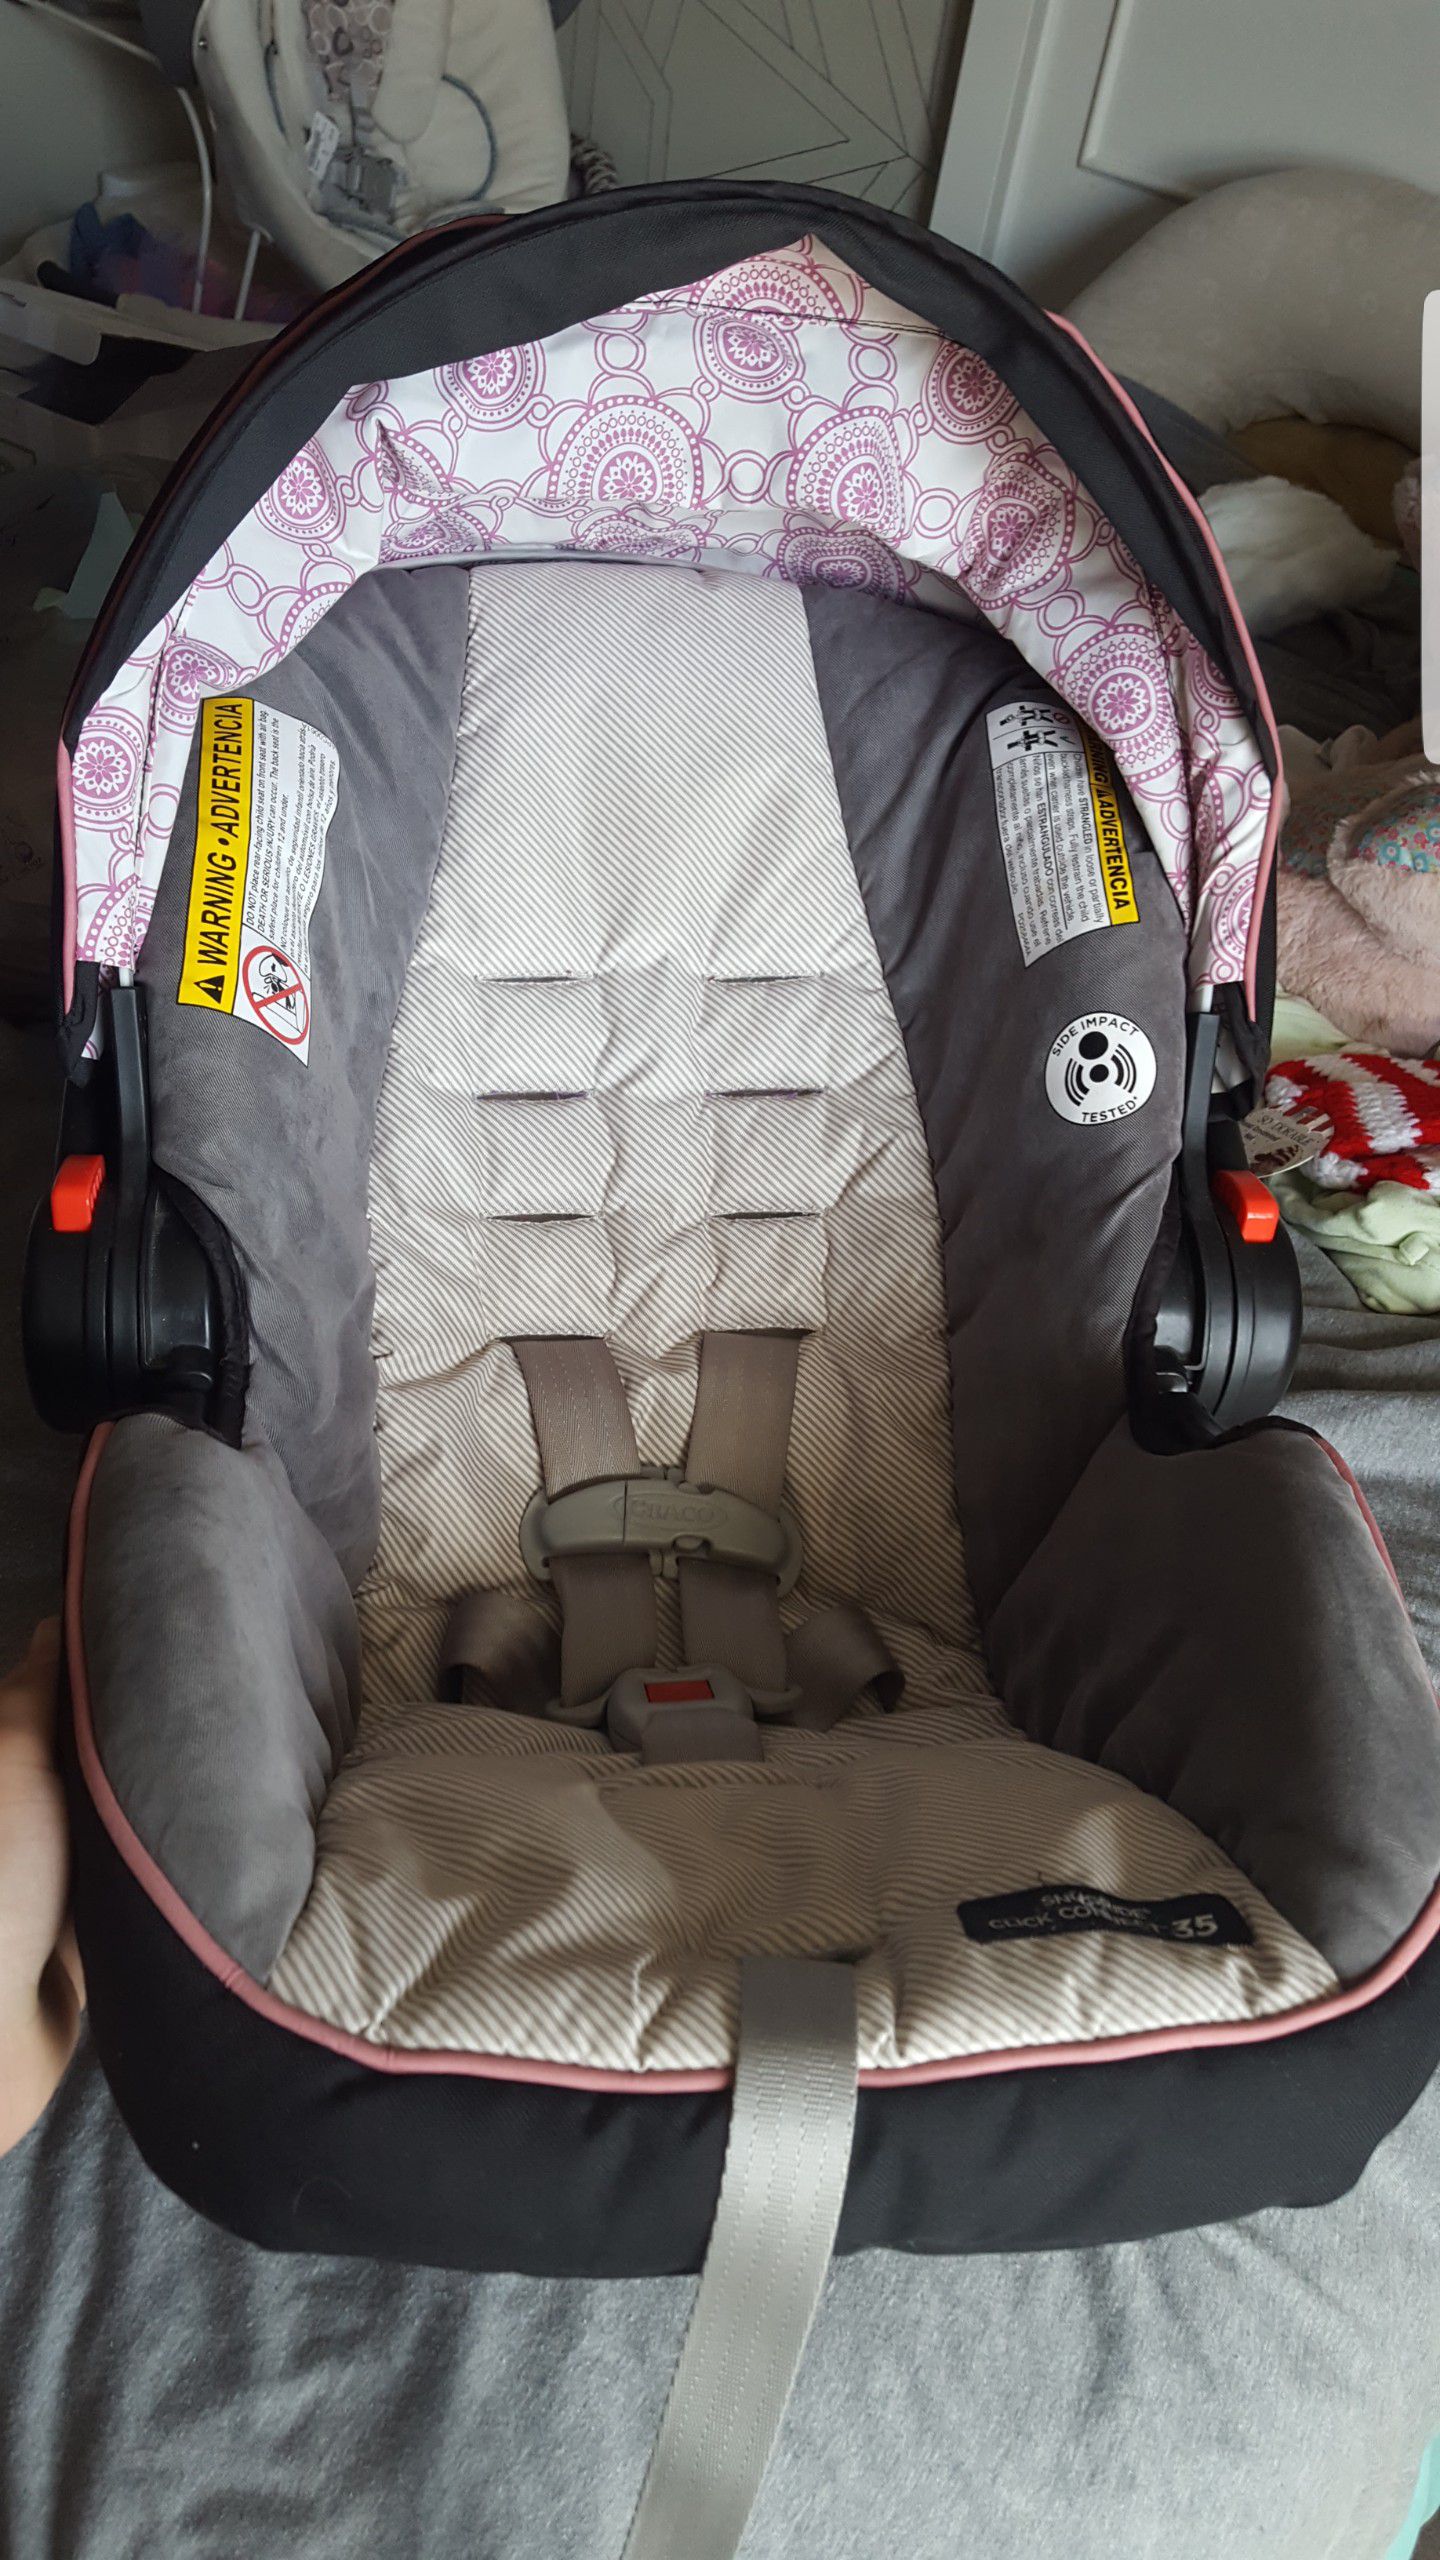 Graco click connect car seat comes with bas